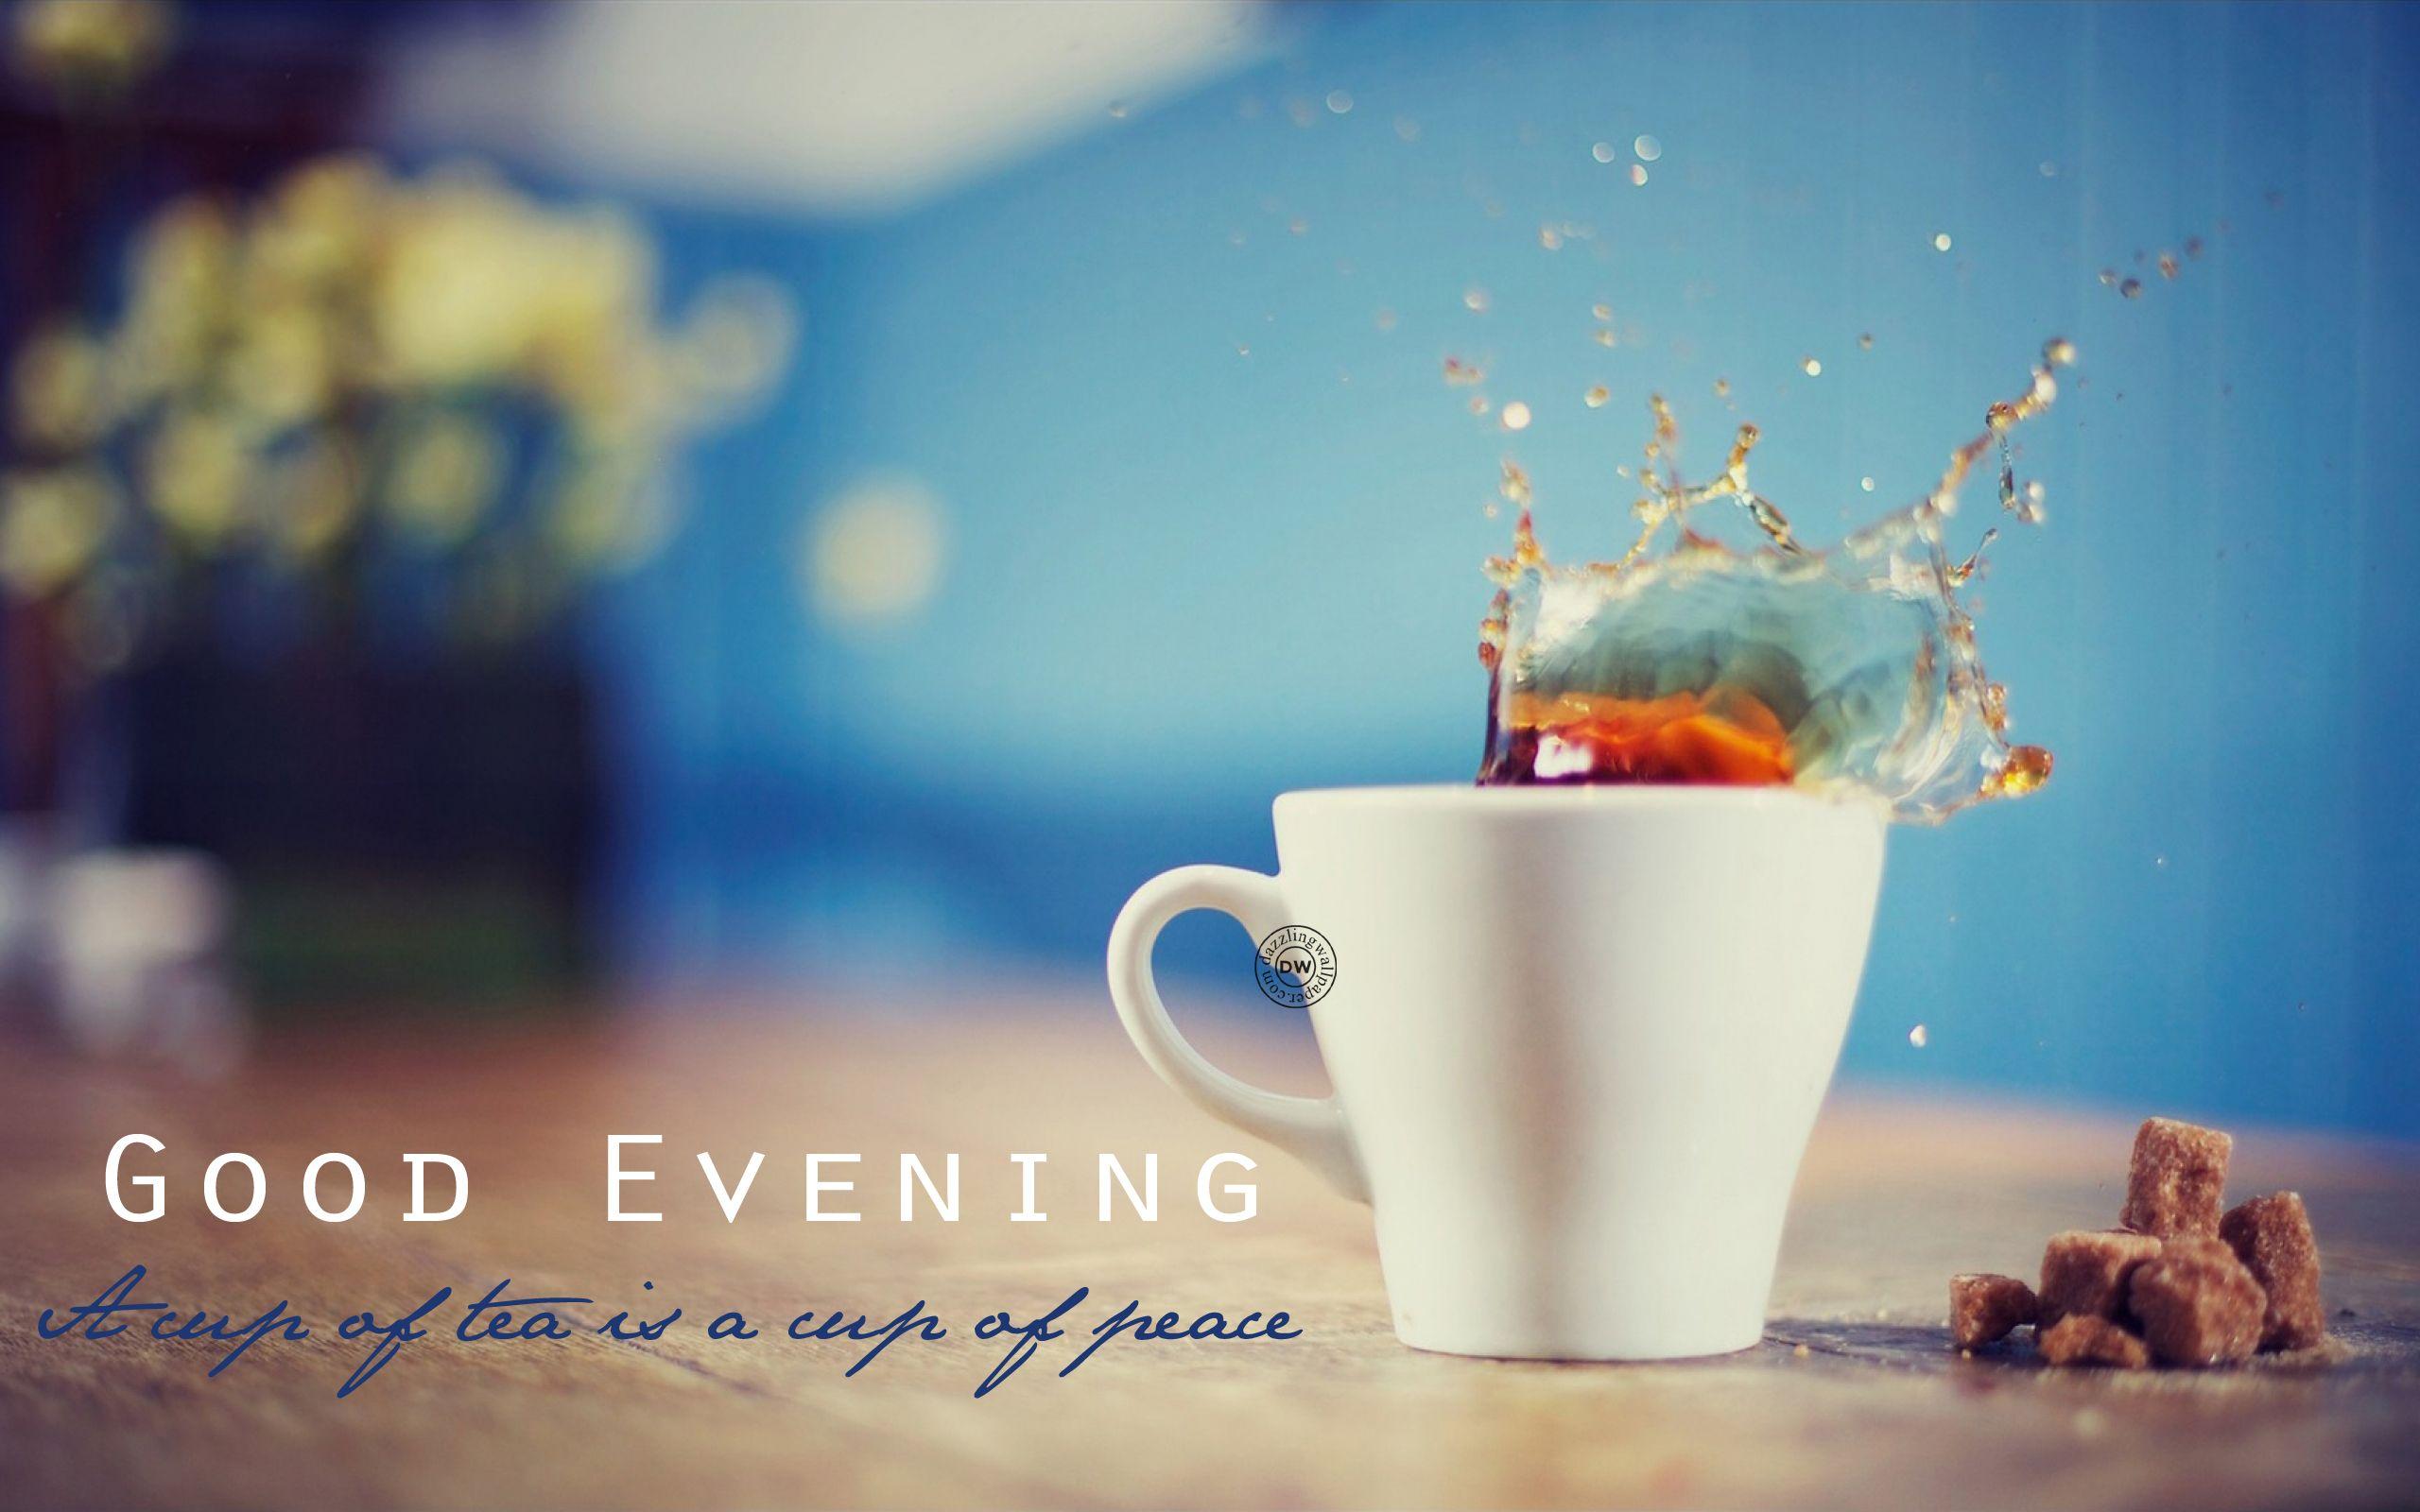 Evening quote and wishes with cup of Tea Good Evening, HD